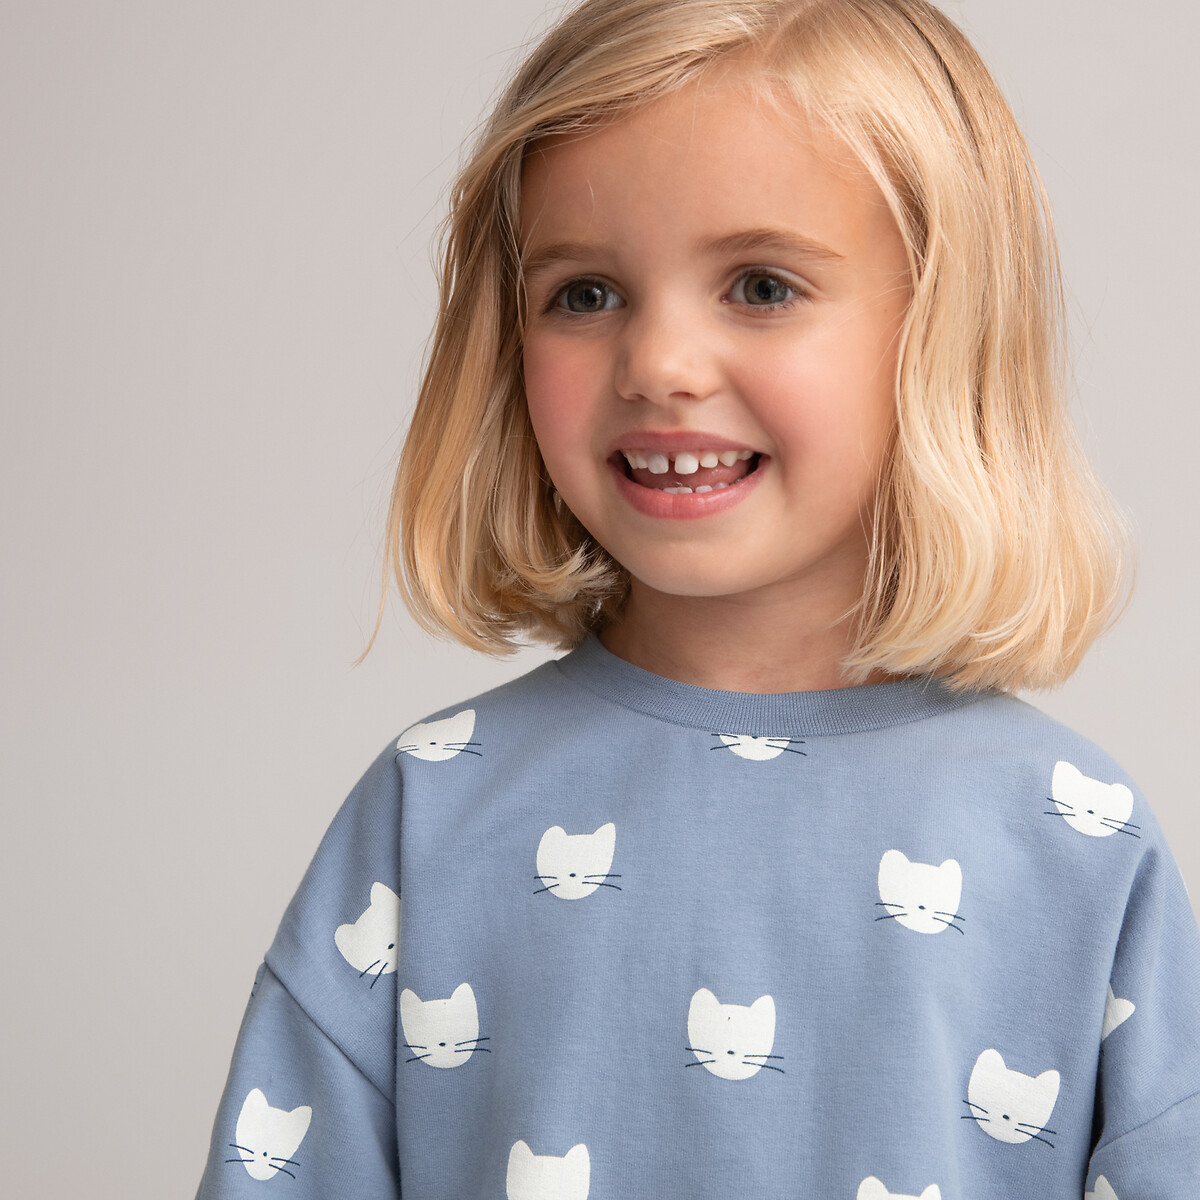 Cat Print Cotton Sweatshirt with Puff Sleeves and Crew Neck